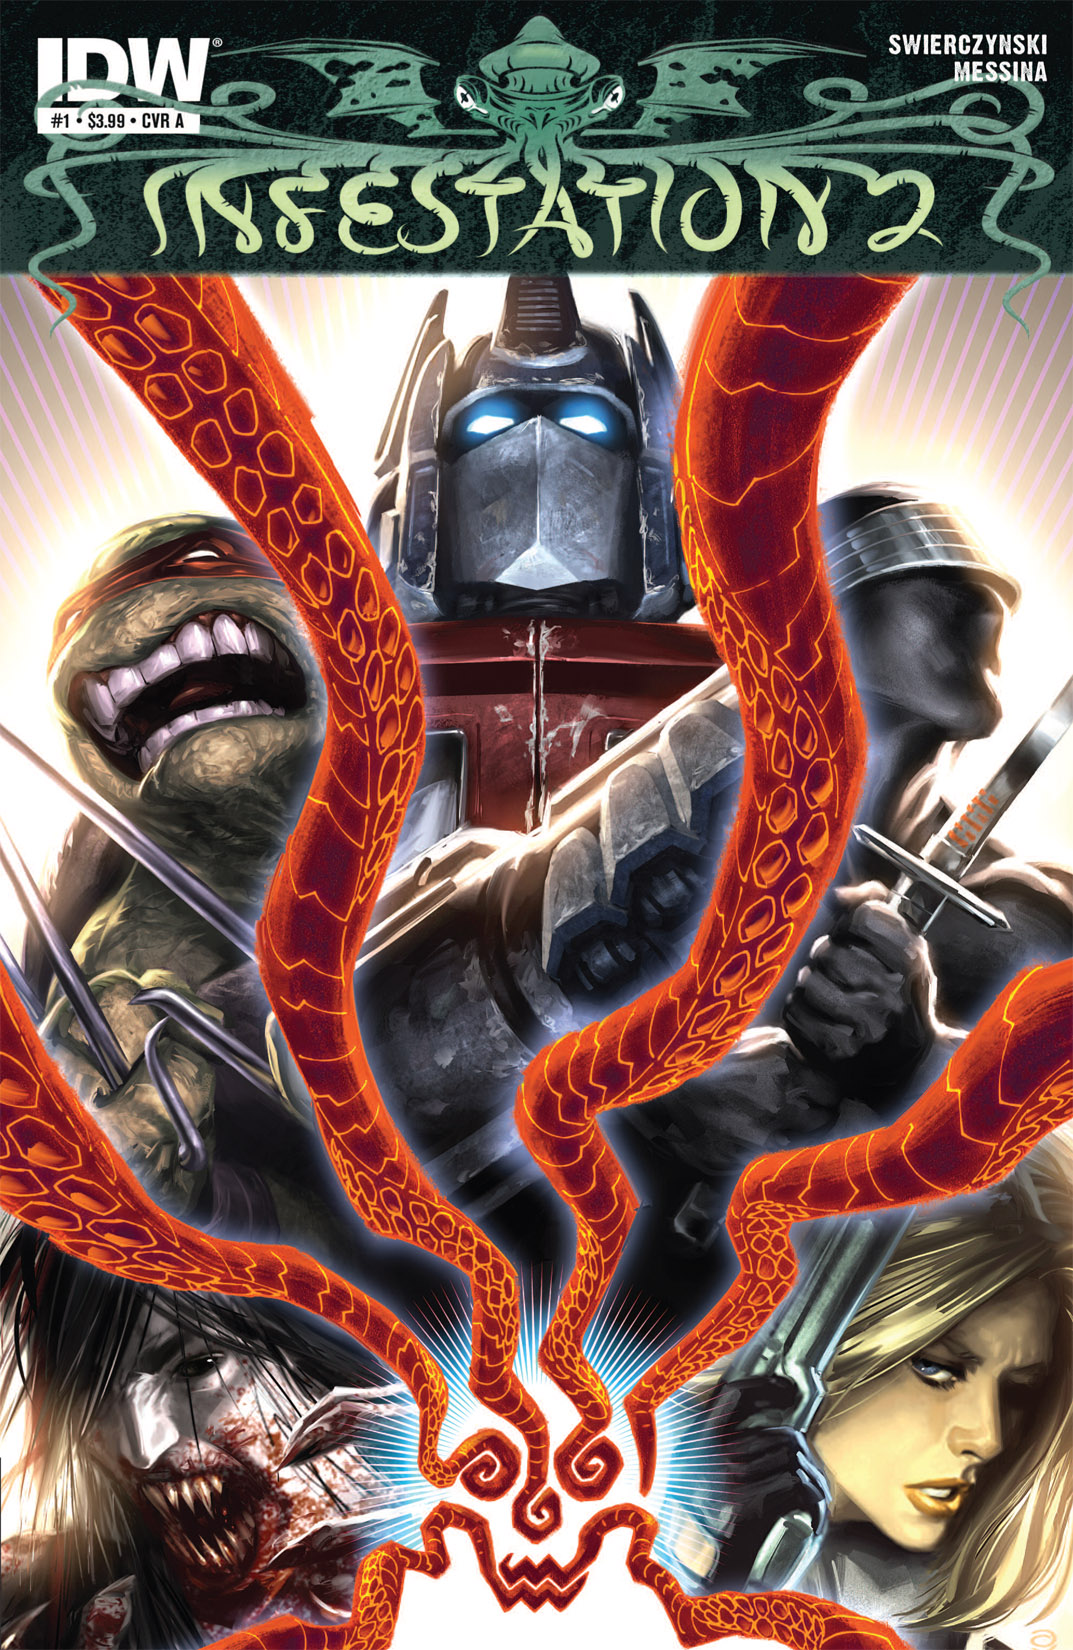 Read online Infestation 2 comic -  Issue #1 - 1